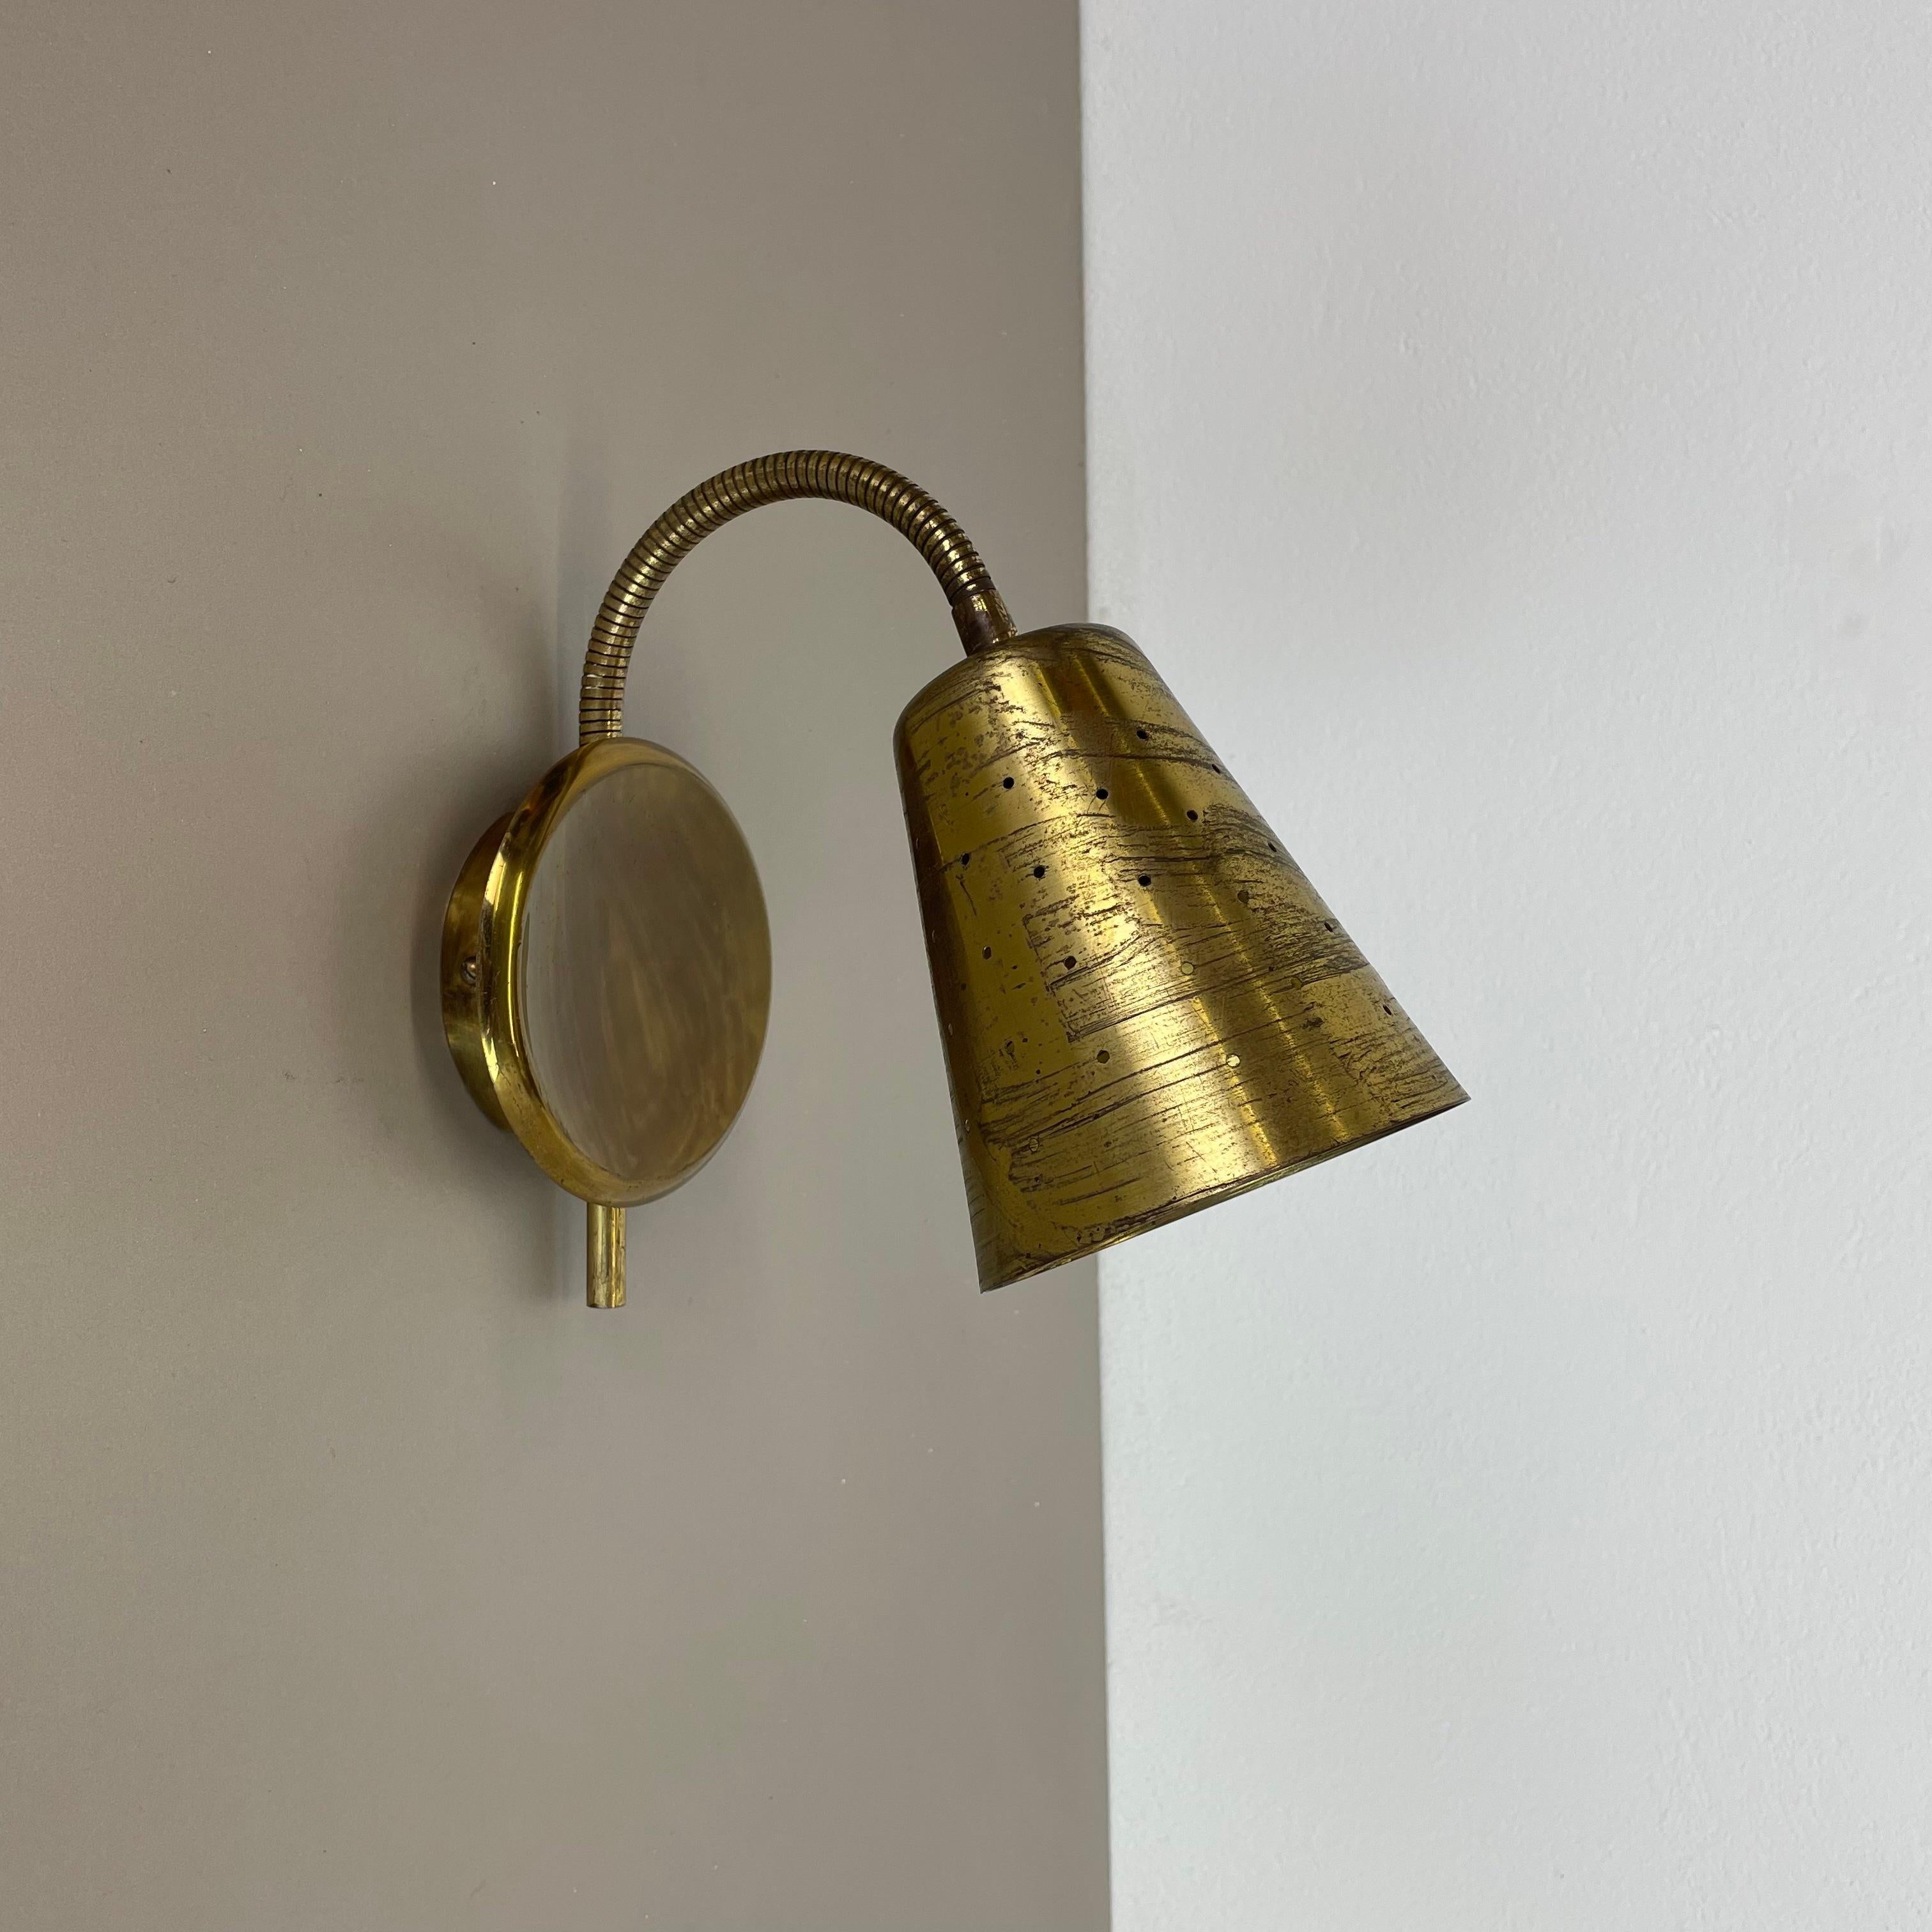 Article:

Wall light


Producer:

Origin Italy in the manner of Stilnovo, Gio Ponti



Age:

1950s



This modernist light was produced in Italy in the 1950s. It is made from brass with one adjustable light arm. This wonderful and